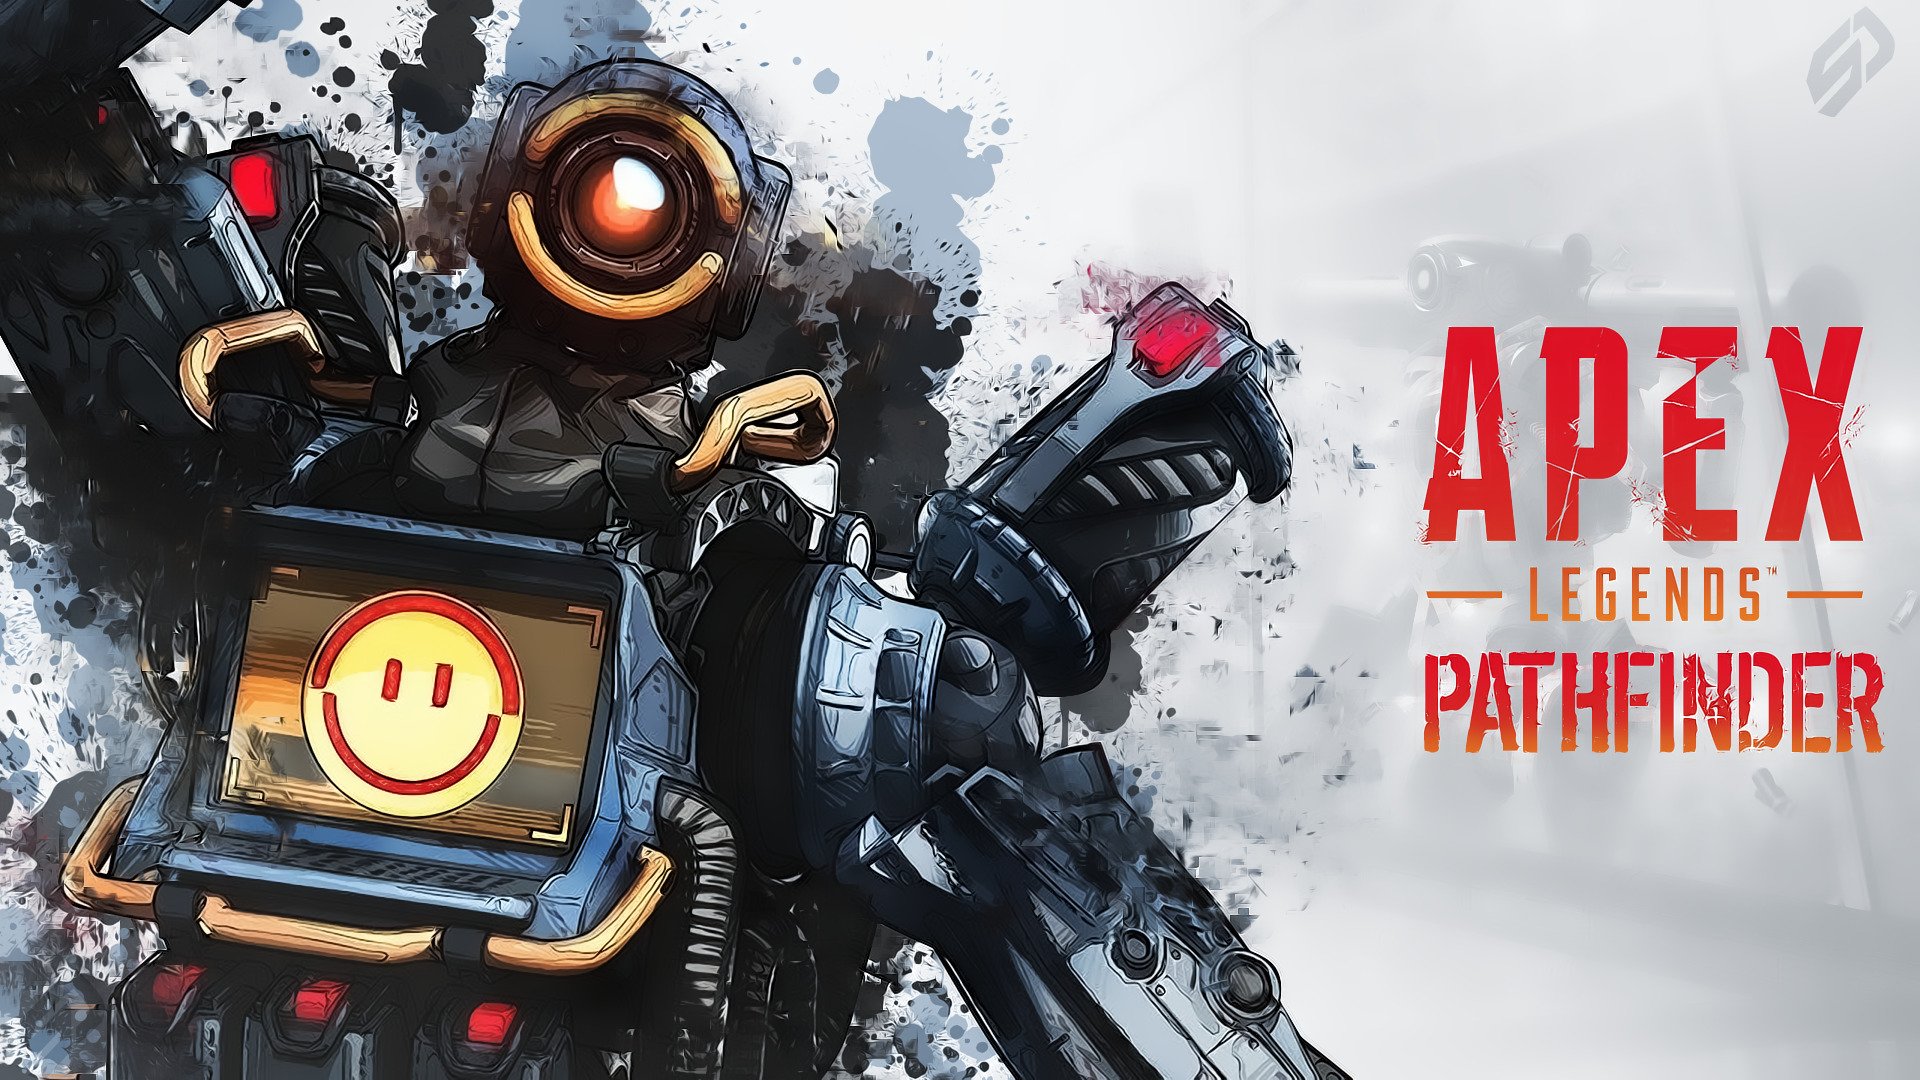 Free Download Apex Legends Hd Wallpaper Background Image 19x1080 Id 19x1080 For Your Desktop Mobile Tablet Explore 25 Apex Legends Hd Wallpapers Apex Legends Hd Wallpapers Apex Legends Game